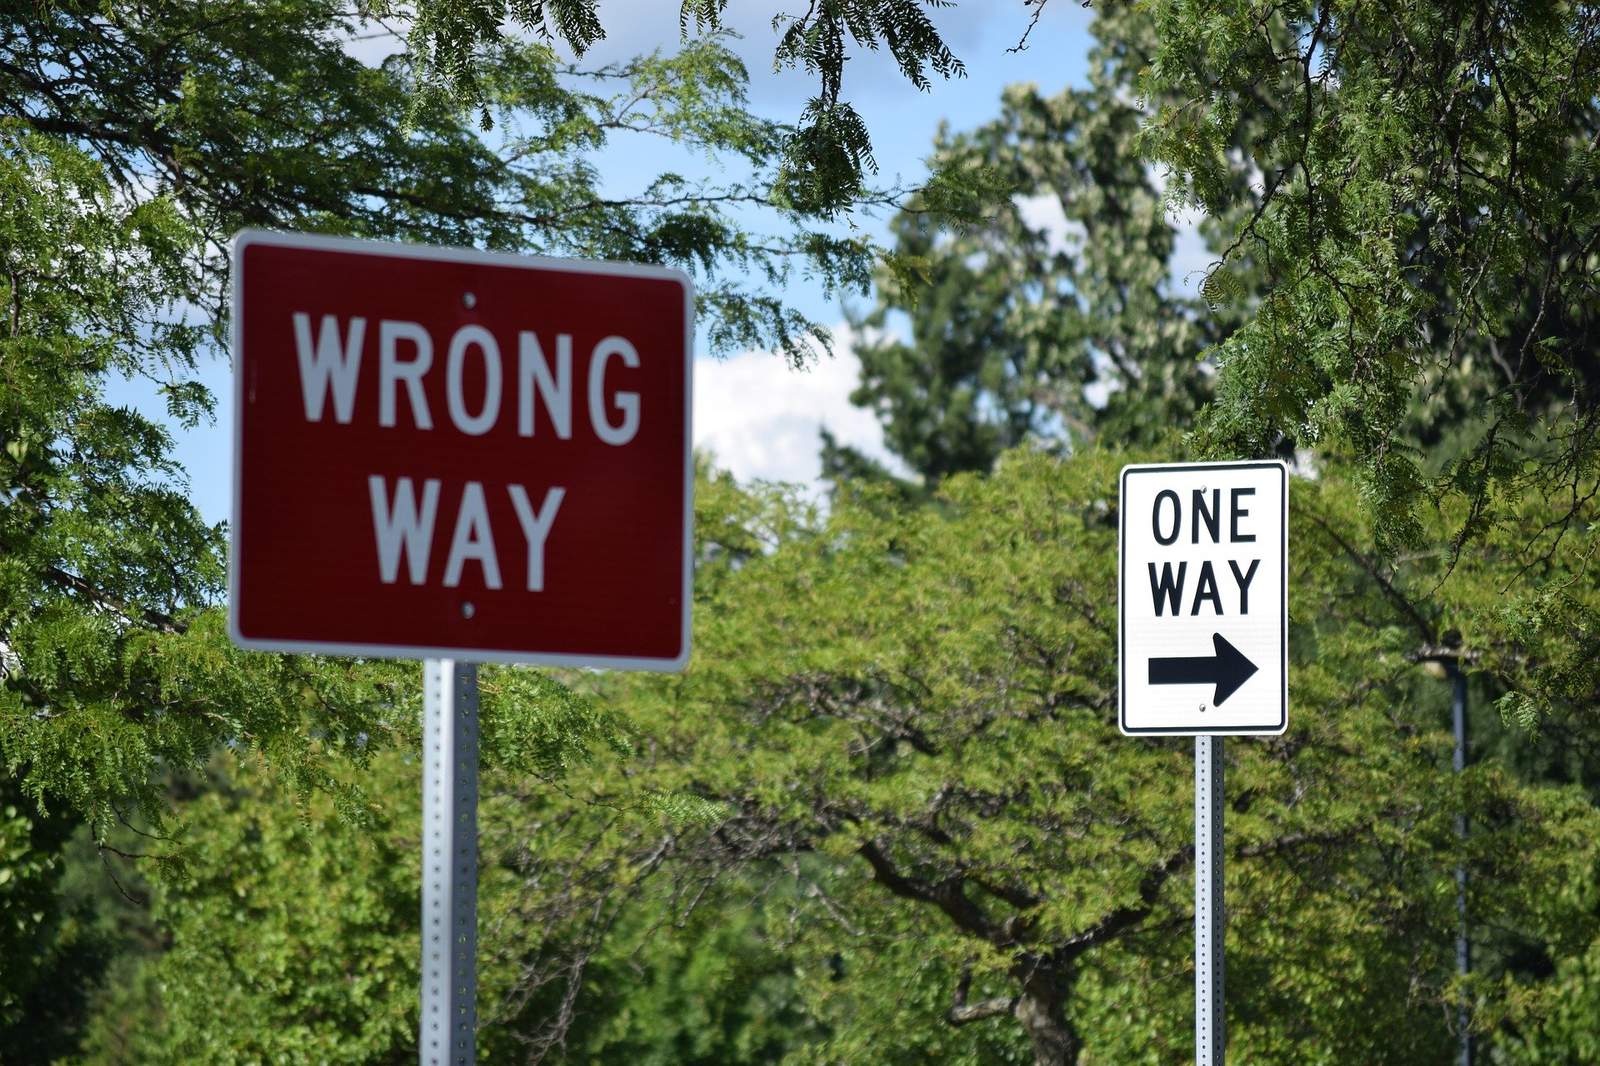 Ask 2: Who can I call to advise about incorrectly marked road signs?